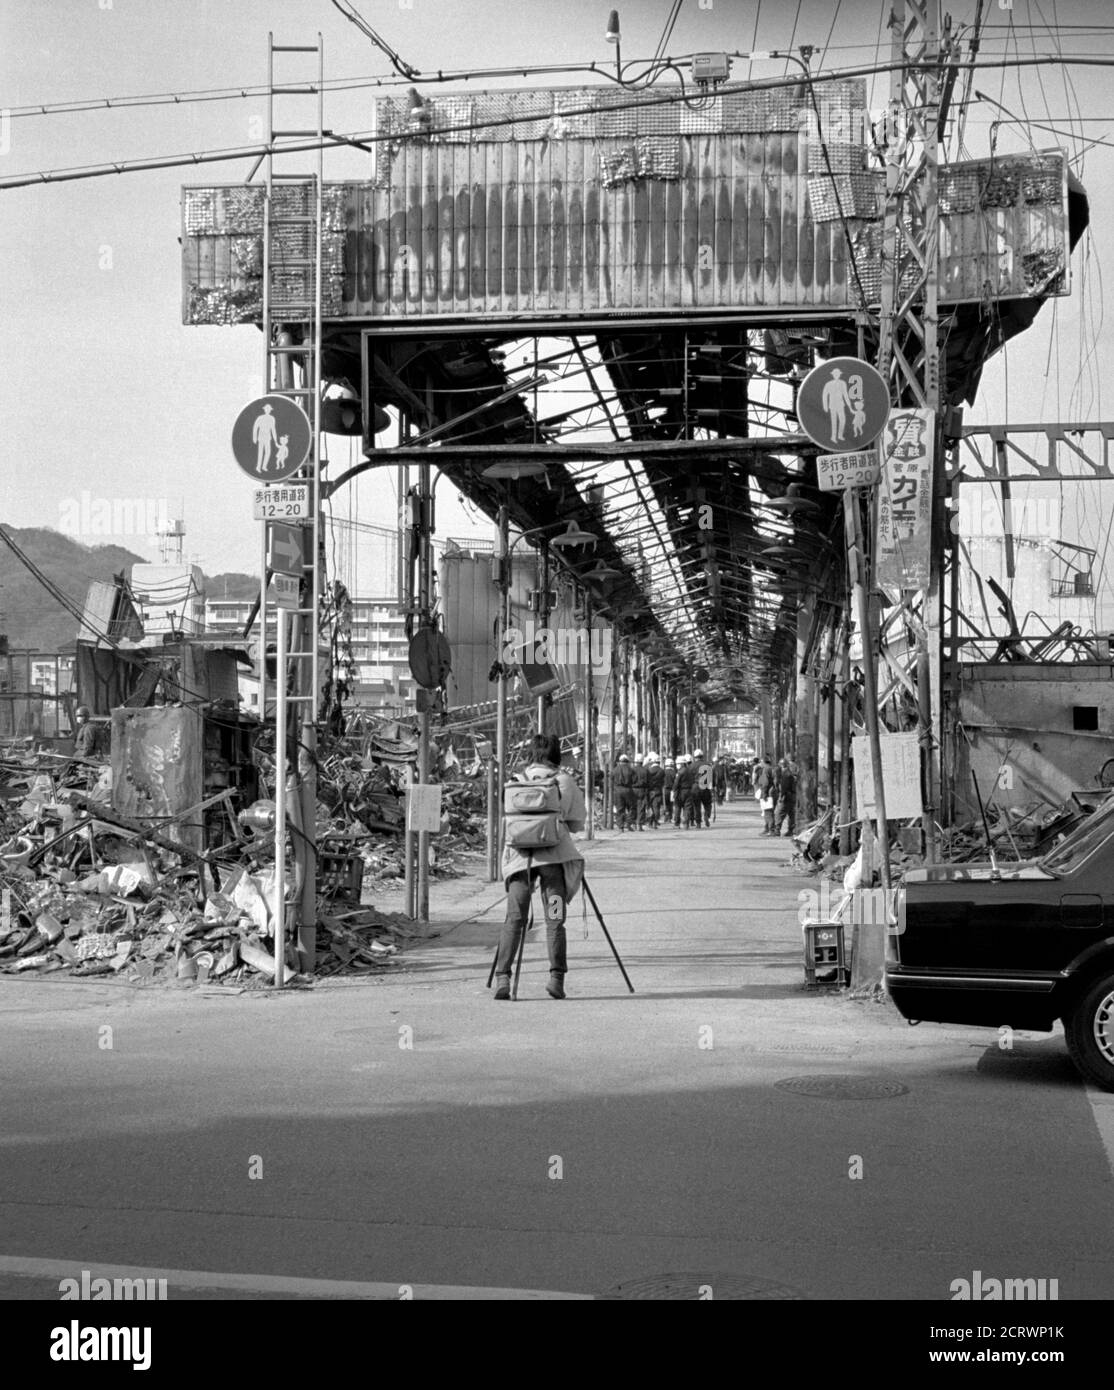 Man takes photo of arcade downtown ruins in the aftermath of the 1995 Great Hanshin Earthquake in Kobe, Japan Stock Photo